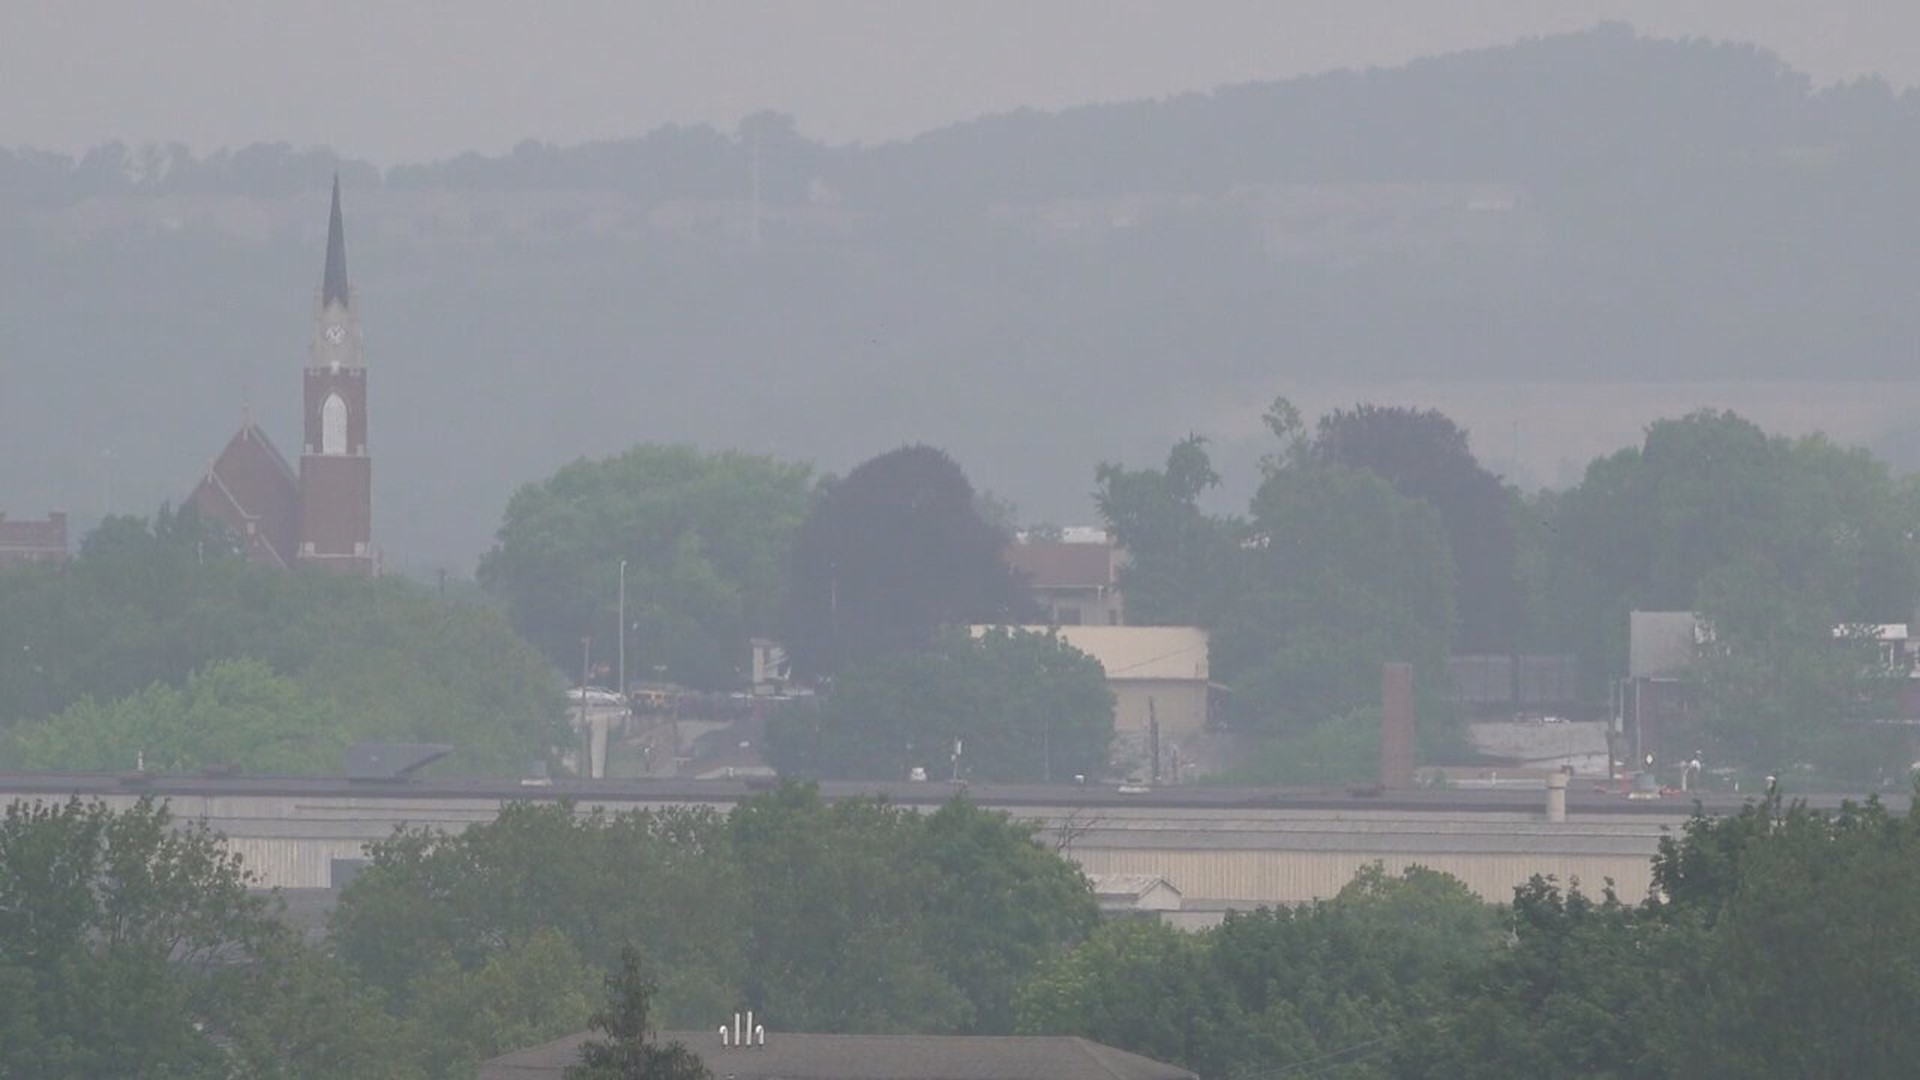 Central Pa. is named the 8th most polluted area in the U.S., according to a 2023 report, amid growing air quality health concerns caused by Canadian wildfires.